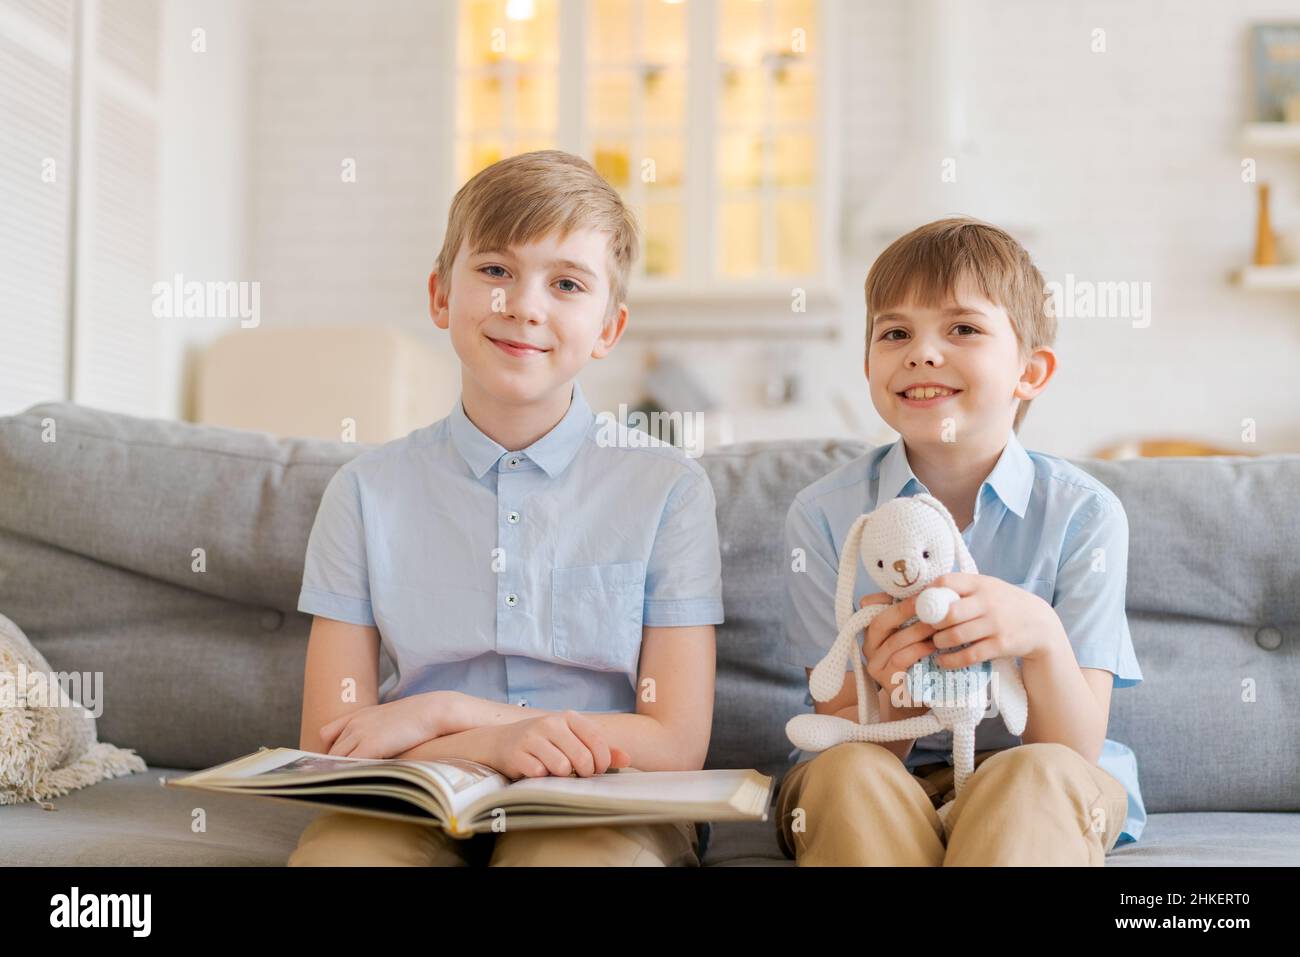 Teach your child to read book as teenager. Caucasian child looking into book while studying with teenager on couch in living room at home. Elder brother is reading book in living room on sofa brother Stock Photo